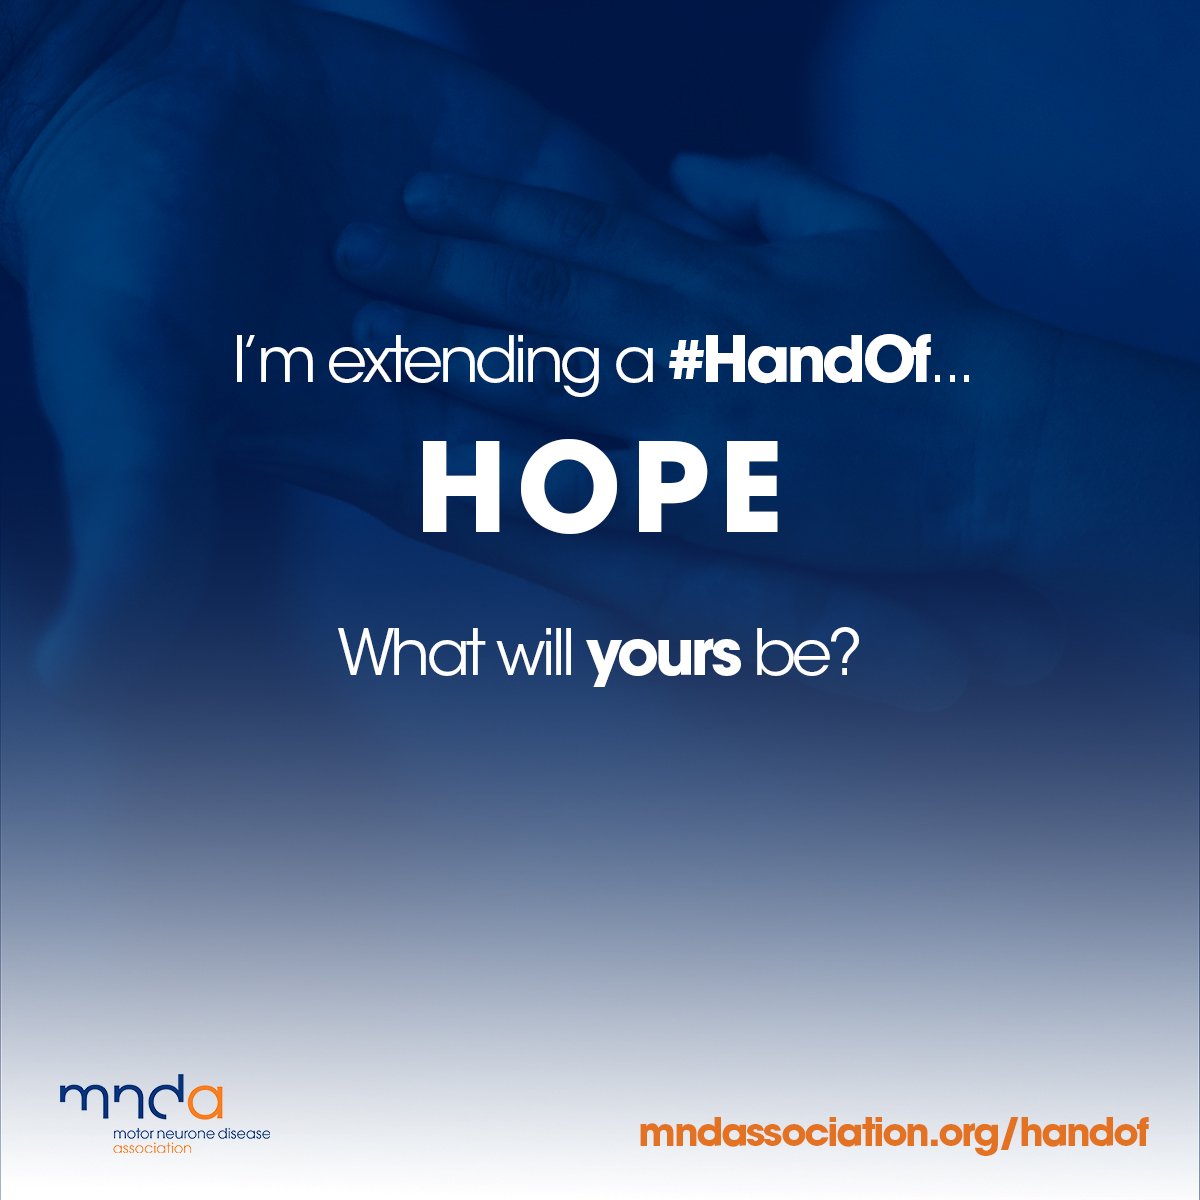 Its #MNDawarenessday today and I extend a #HandOf Hope

1 in 300 develop MND. We don't know what causes it & there is no cure

But through research & support we can offer hope. Organisations like @mndassoc @MNDScotland @AnneRowlClinic do vital work -
 Please support them 💙